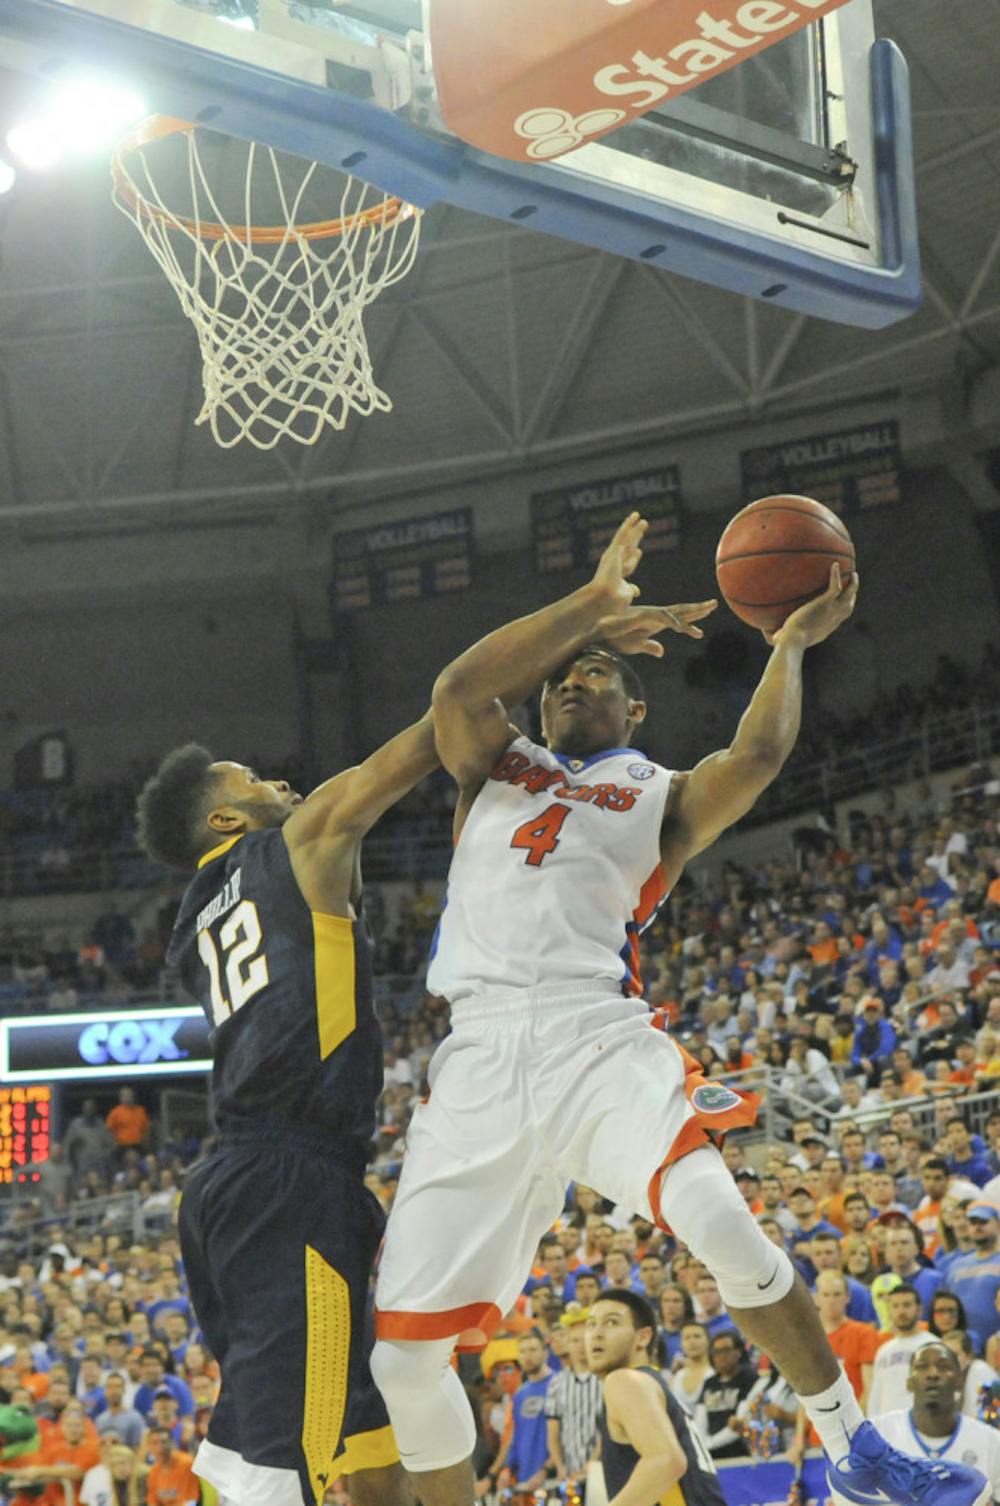 <p>UF guard KeVaughn Allen goes up for a layup during Florida's 88-71 win over West Virginia on Jan. 30, 2016, in the O'Connell Center. </p>